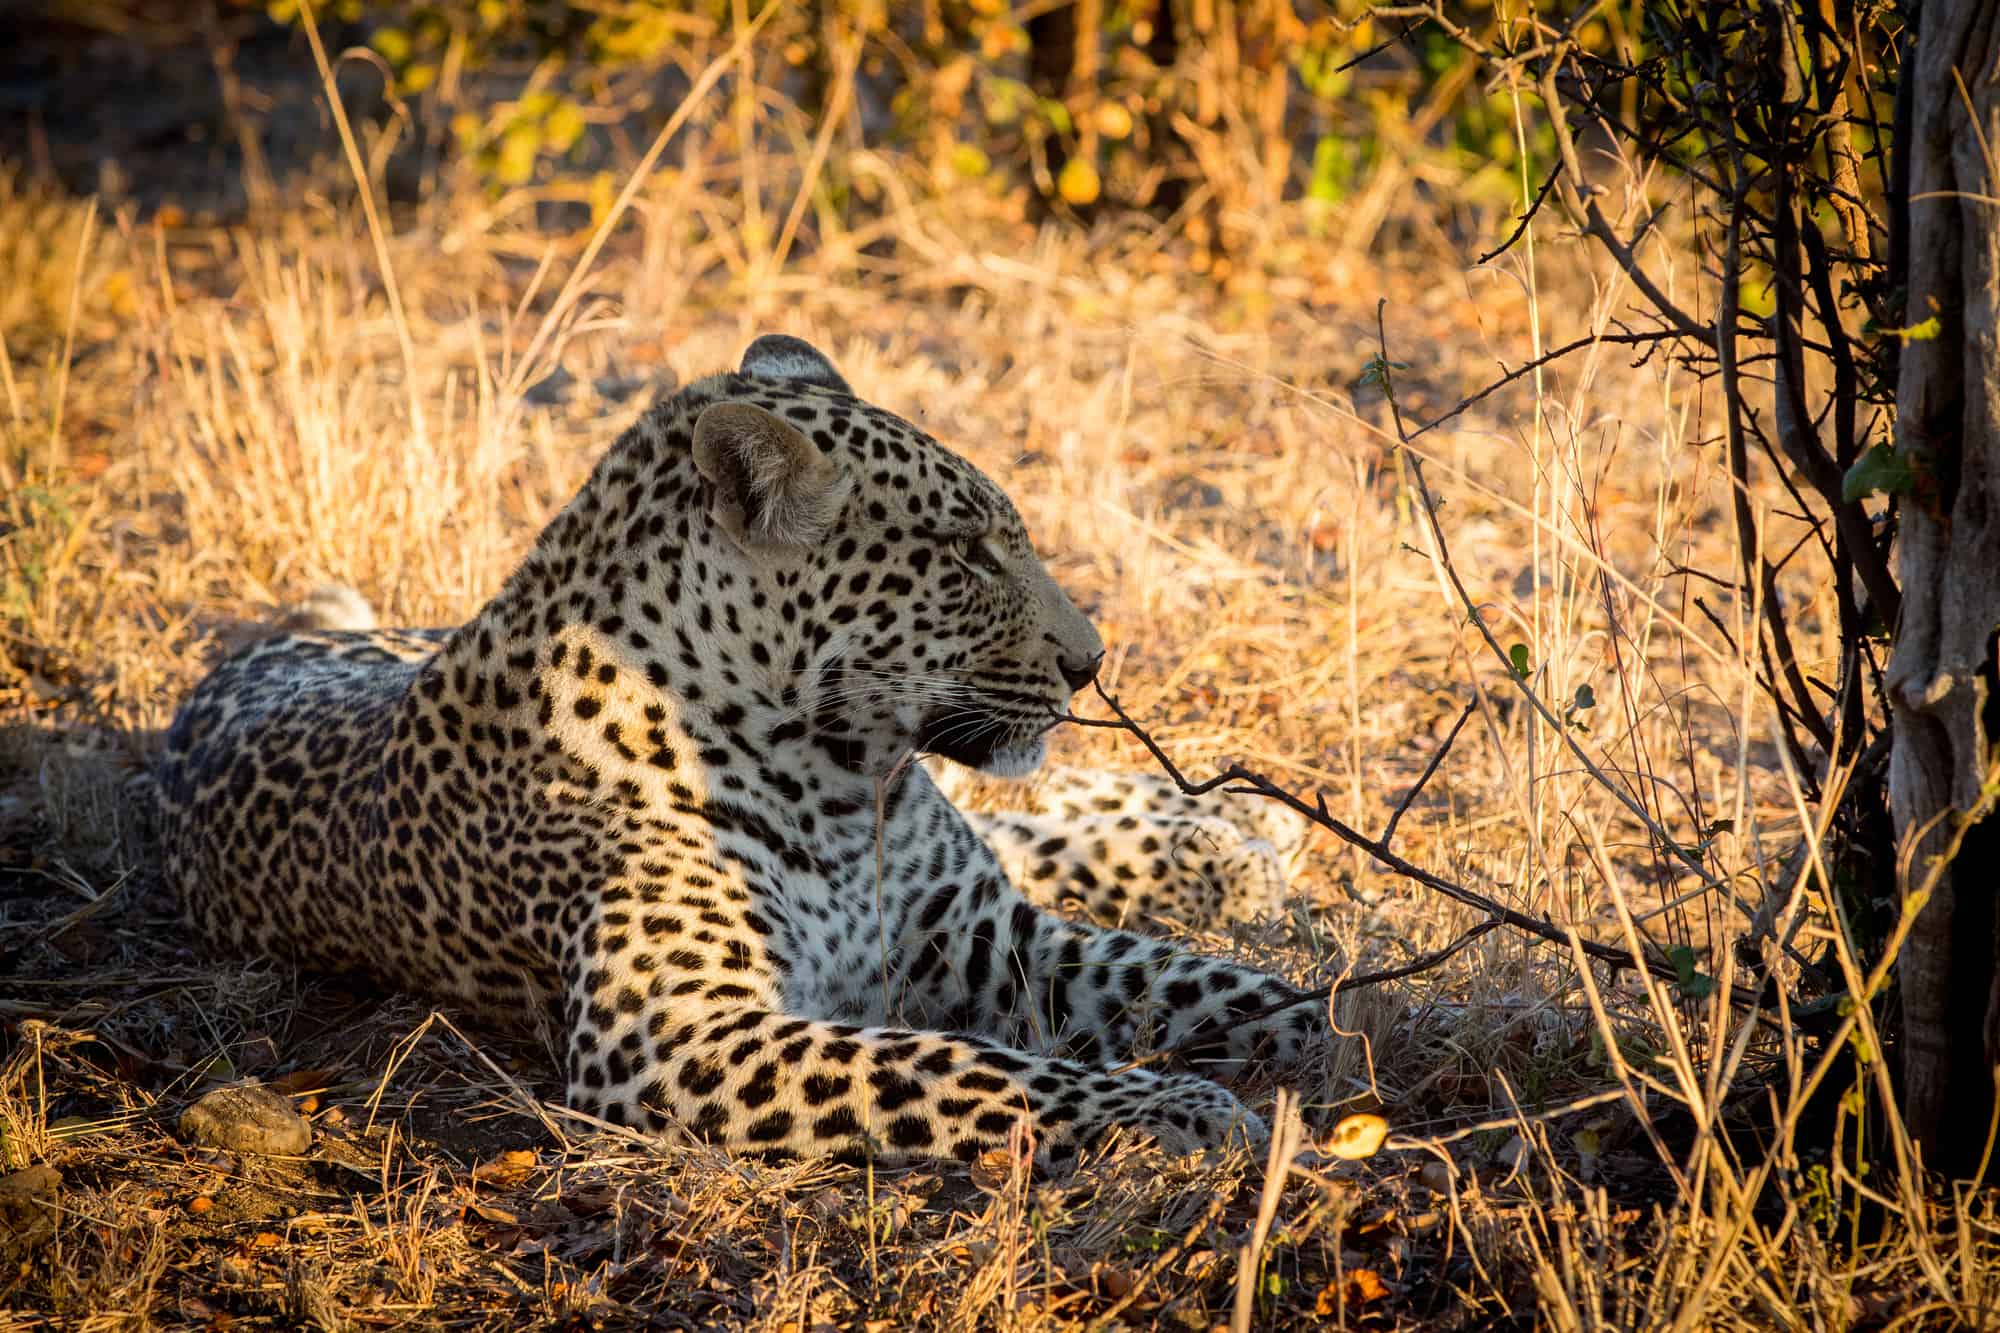 Leopard resting in the shade of a small tree at sunrise in Sabi Sands in greater Kruger National Park, South Africa